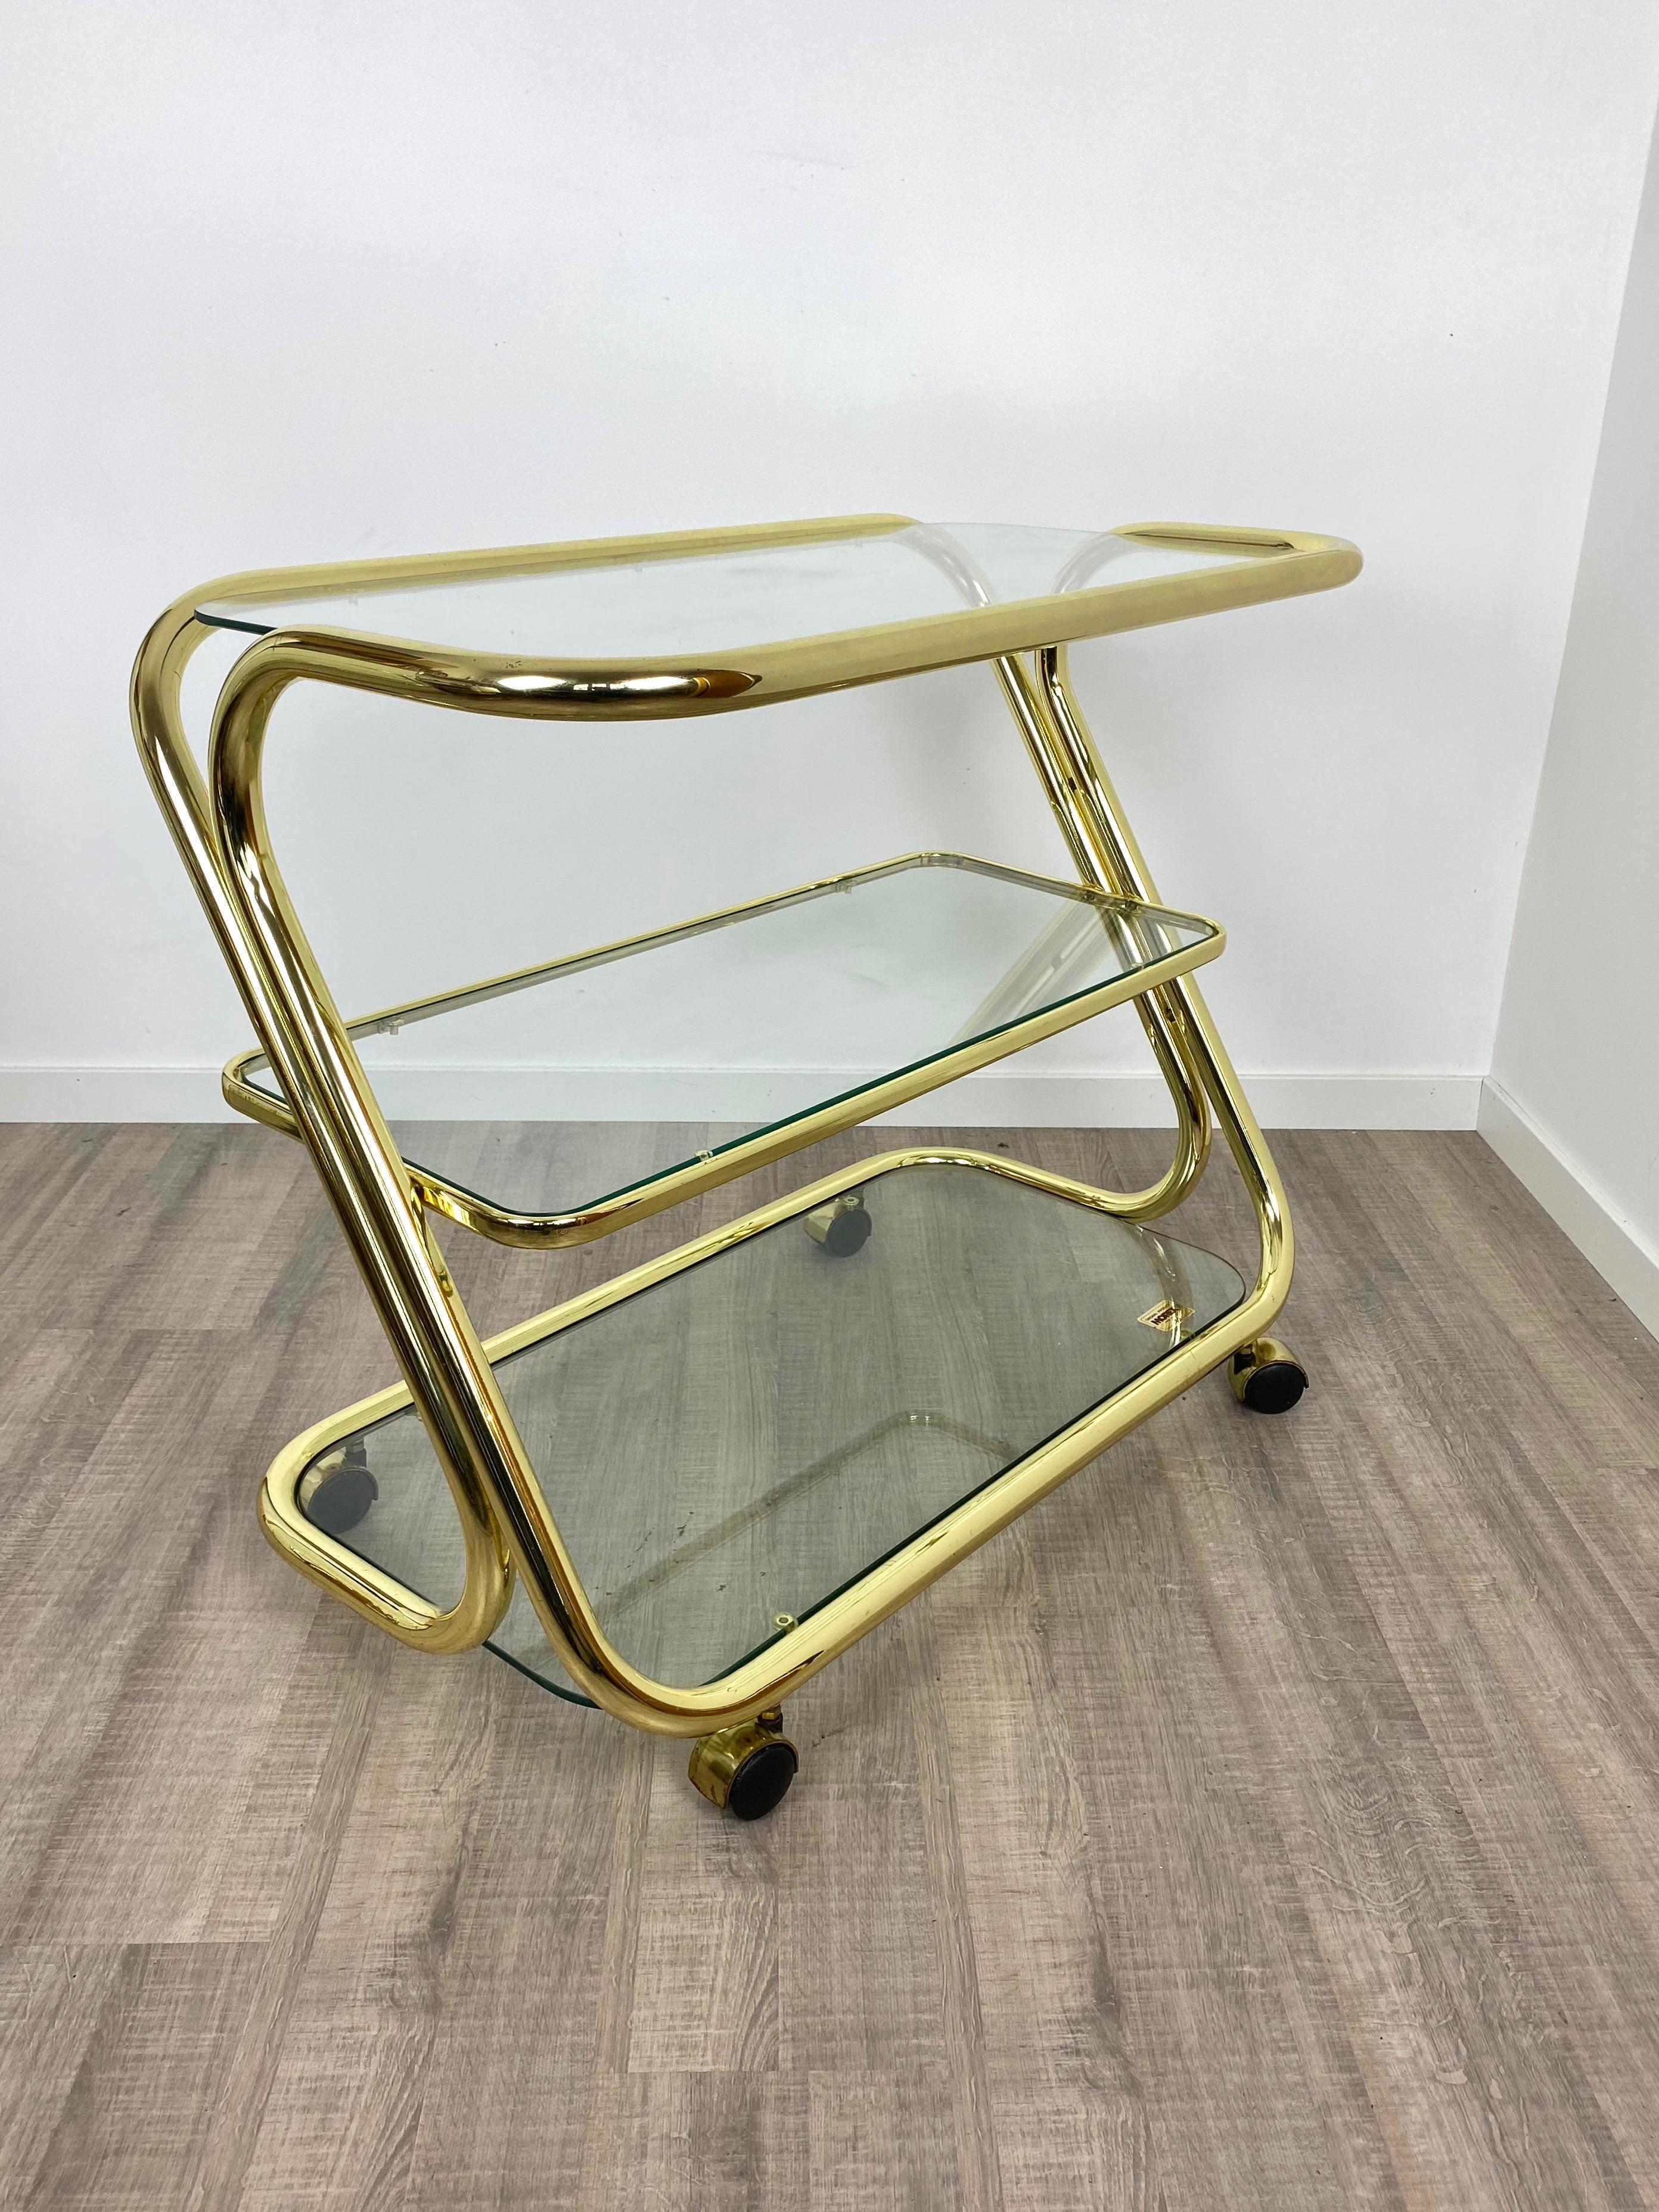 Serving Cart Trolley in Glass and Golden Metal by Morex, Italy, 1980s For Sale 7